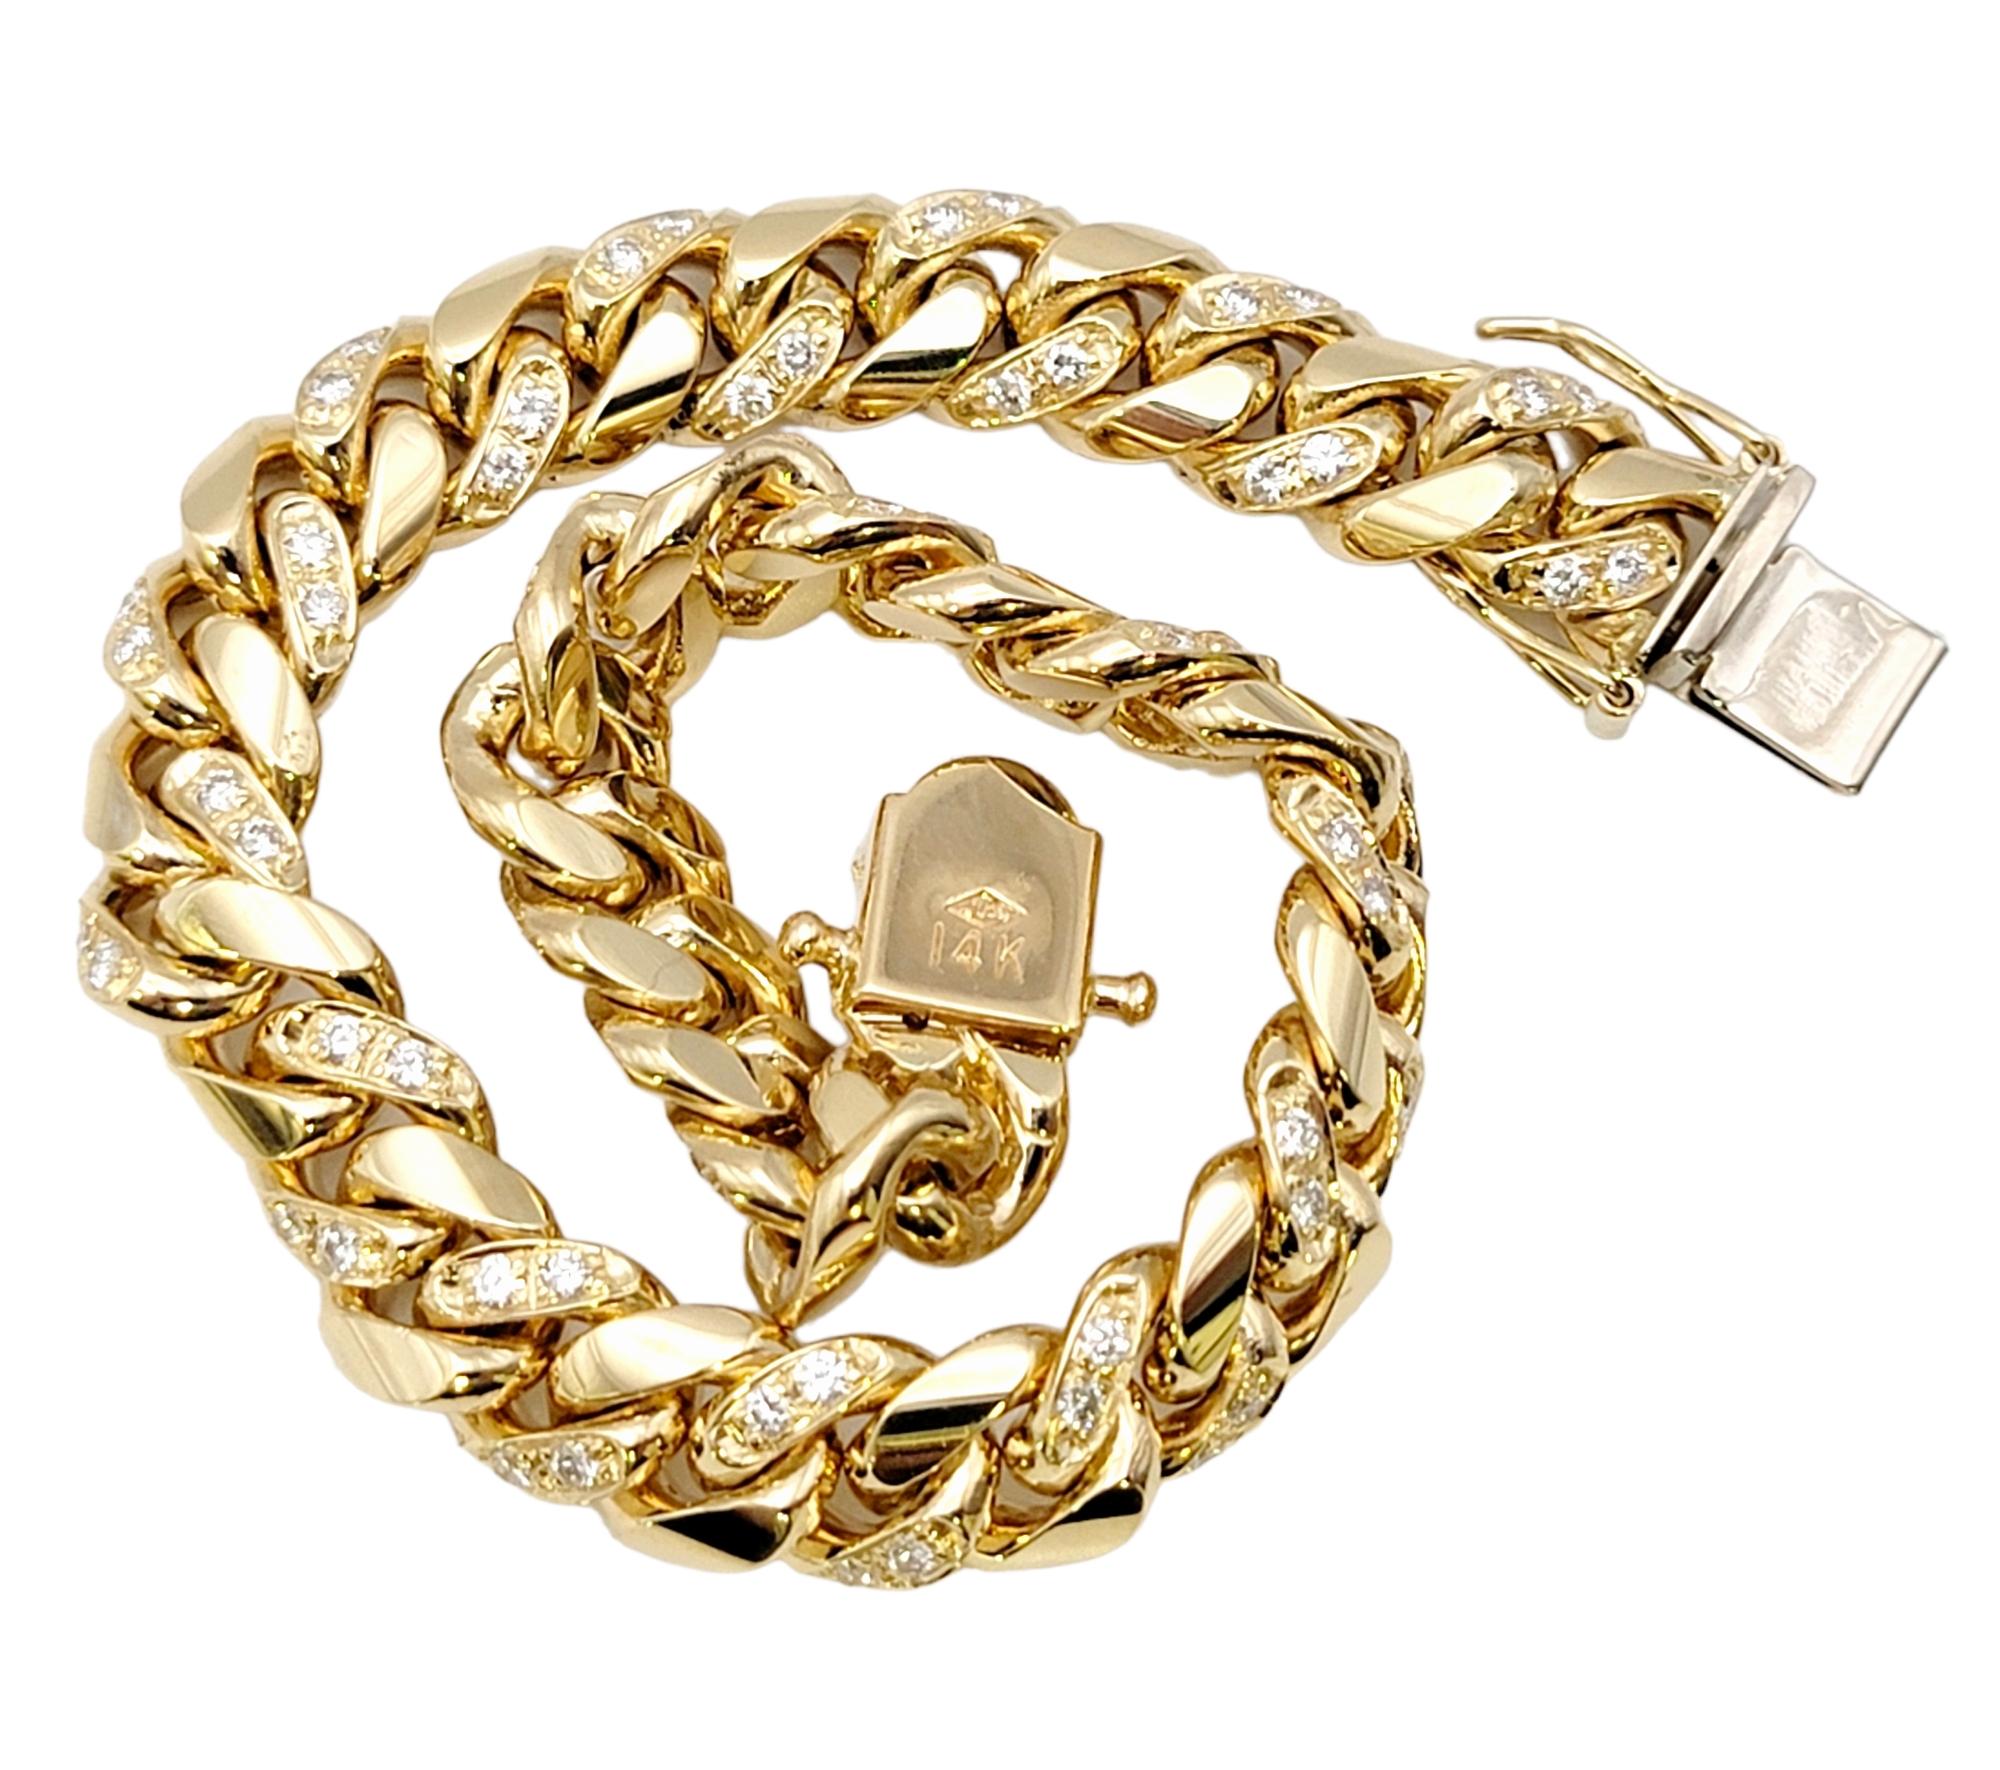 Unisex 14 Karat Yellow Gold Curb Link Bracelet with Pave Diamond Accents For Sale 1